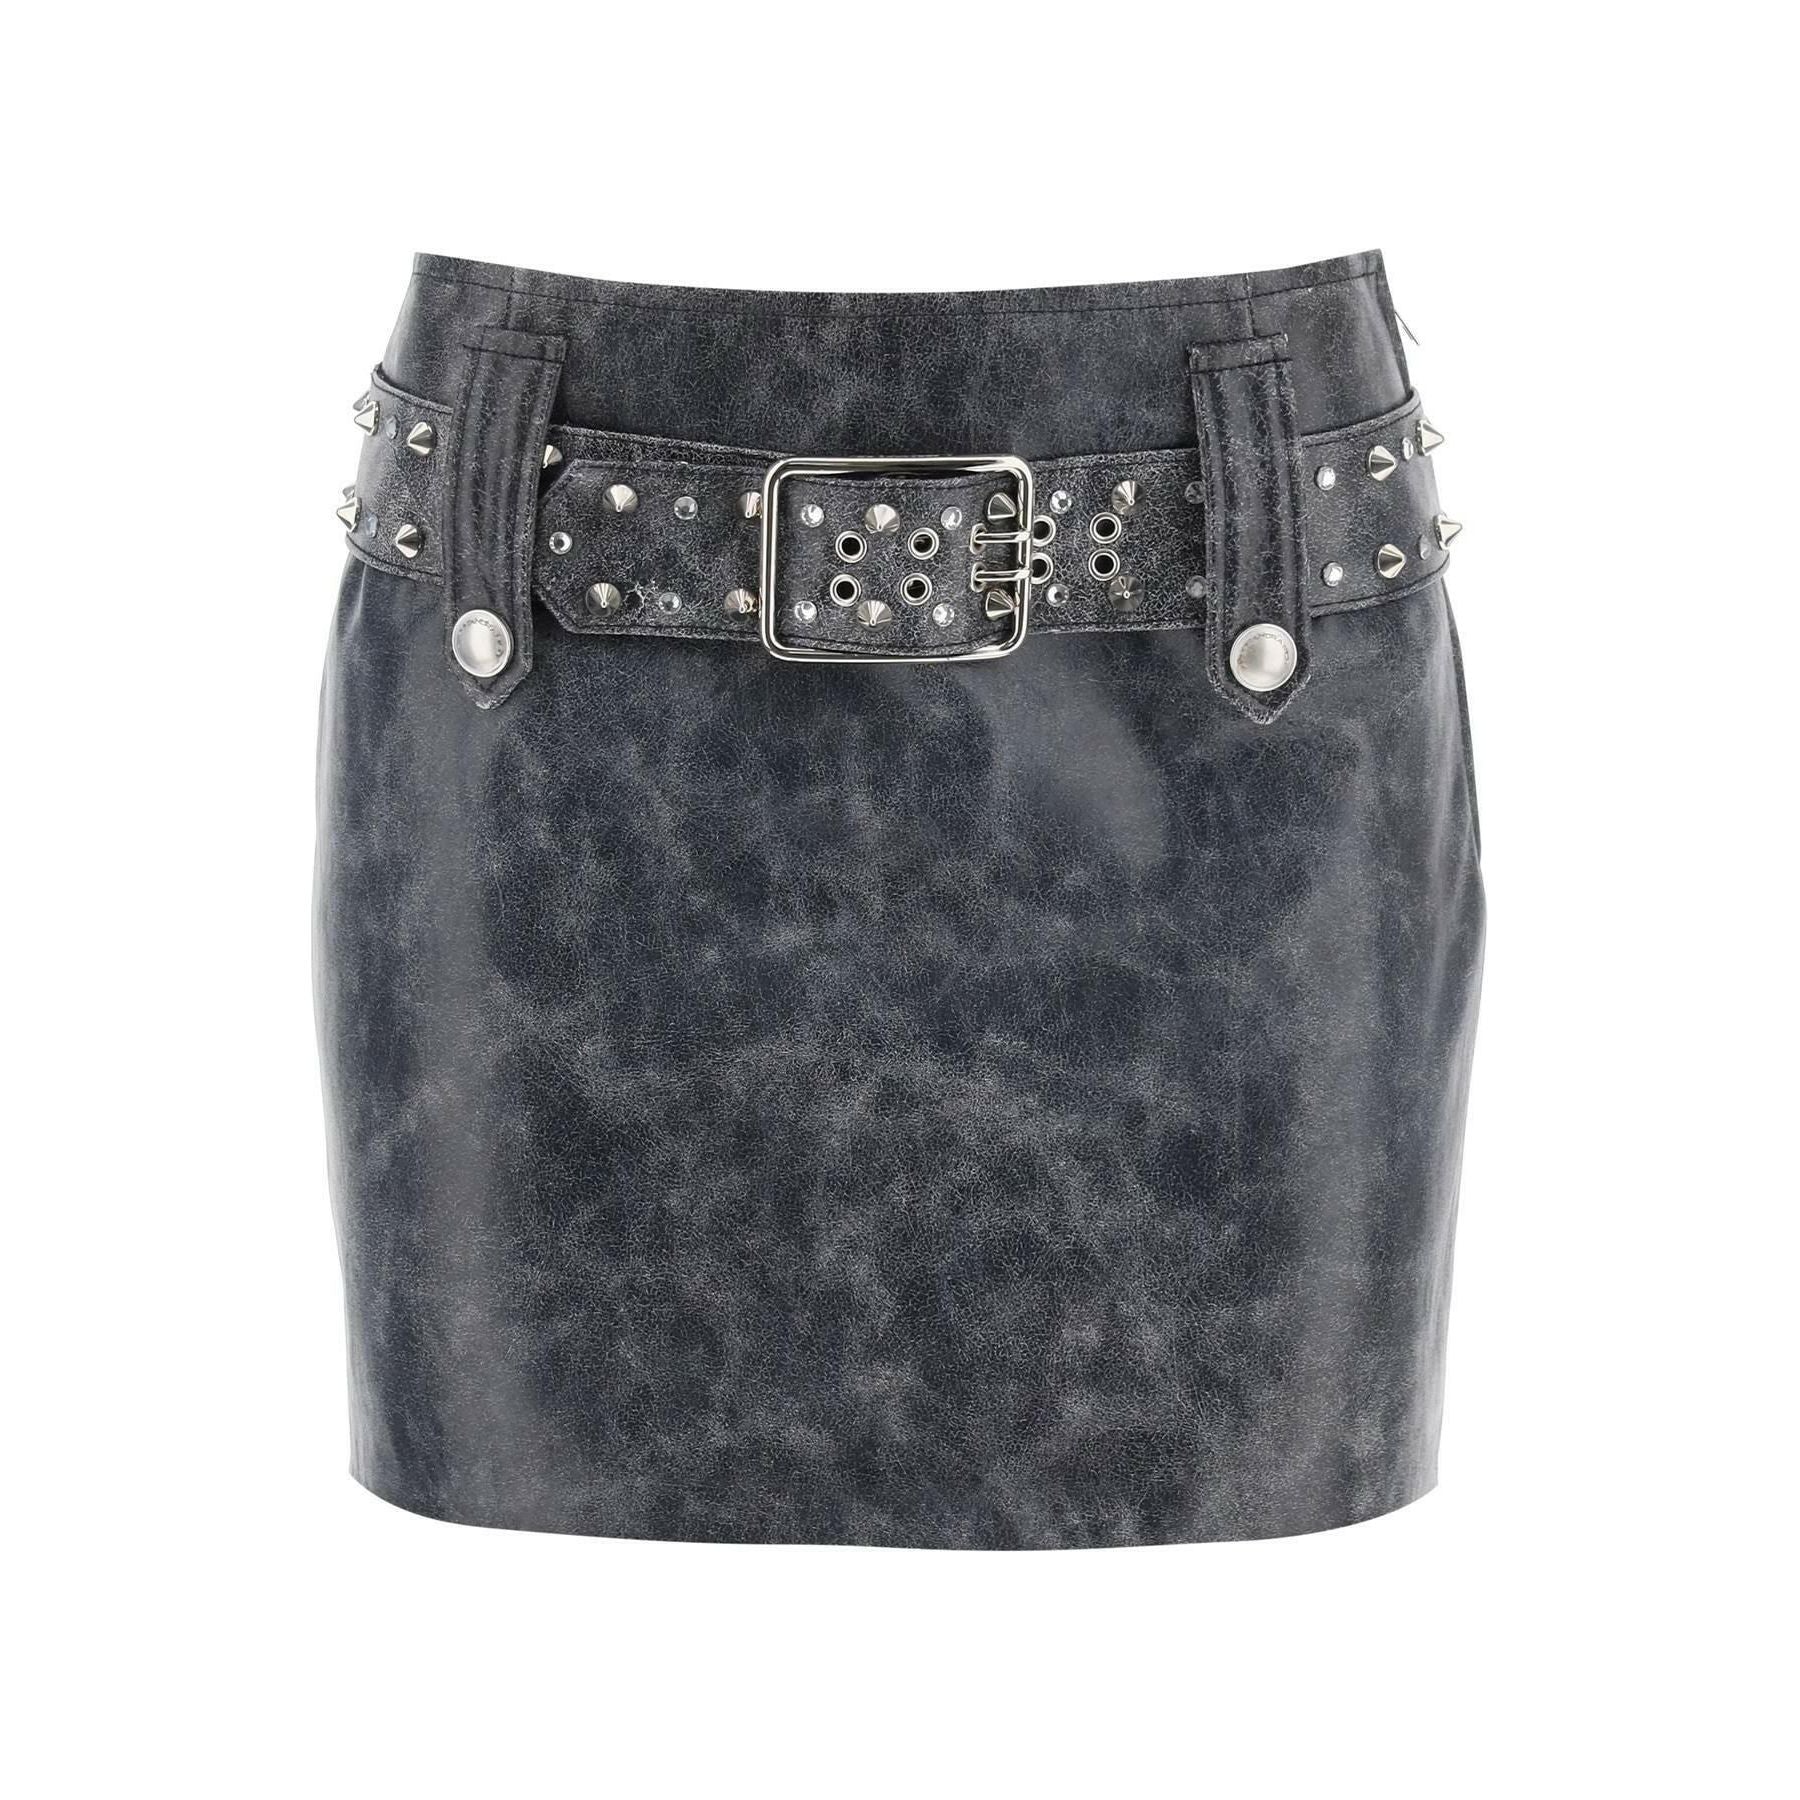 Leather Mini Skirt With Belt And Appliques ALESSANDRA RICH JOHN JULIA.